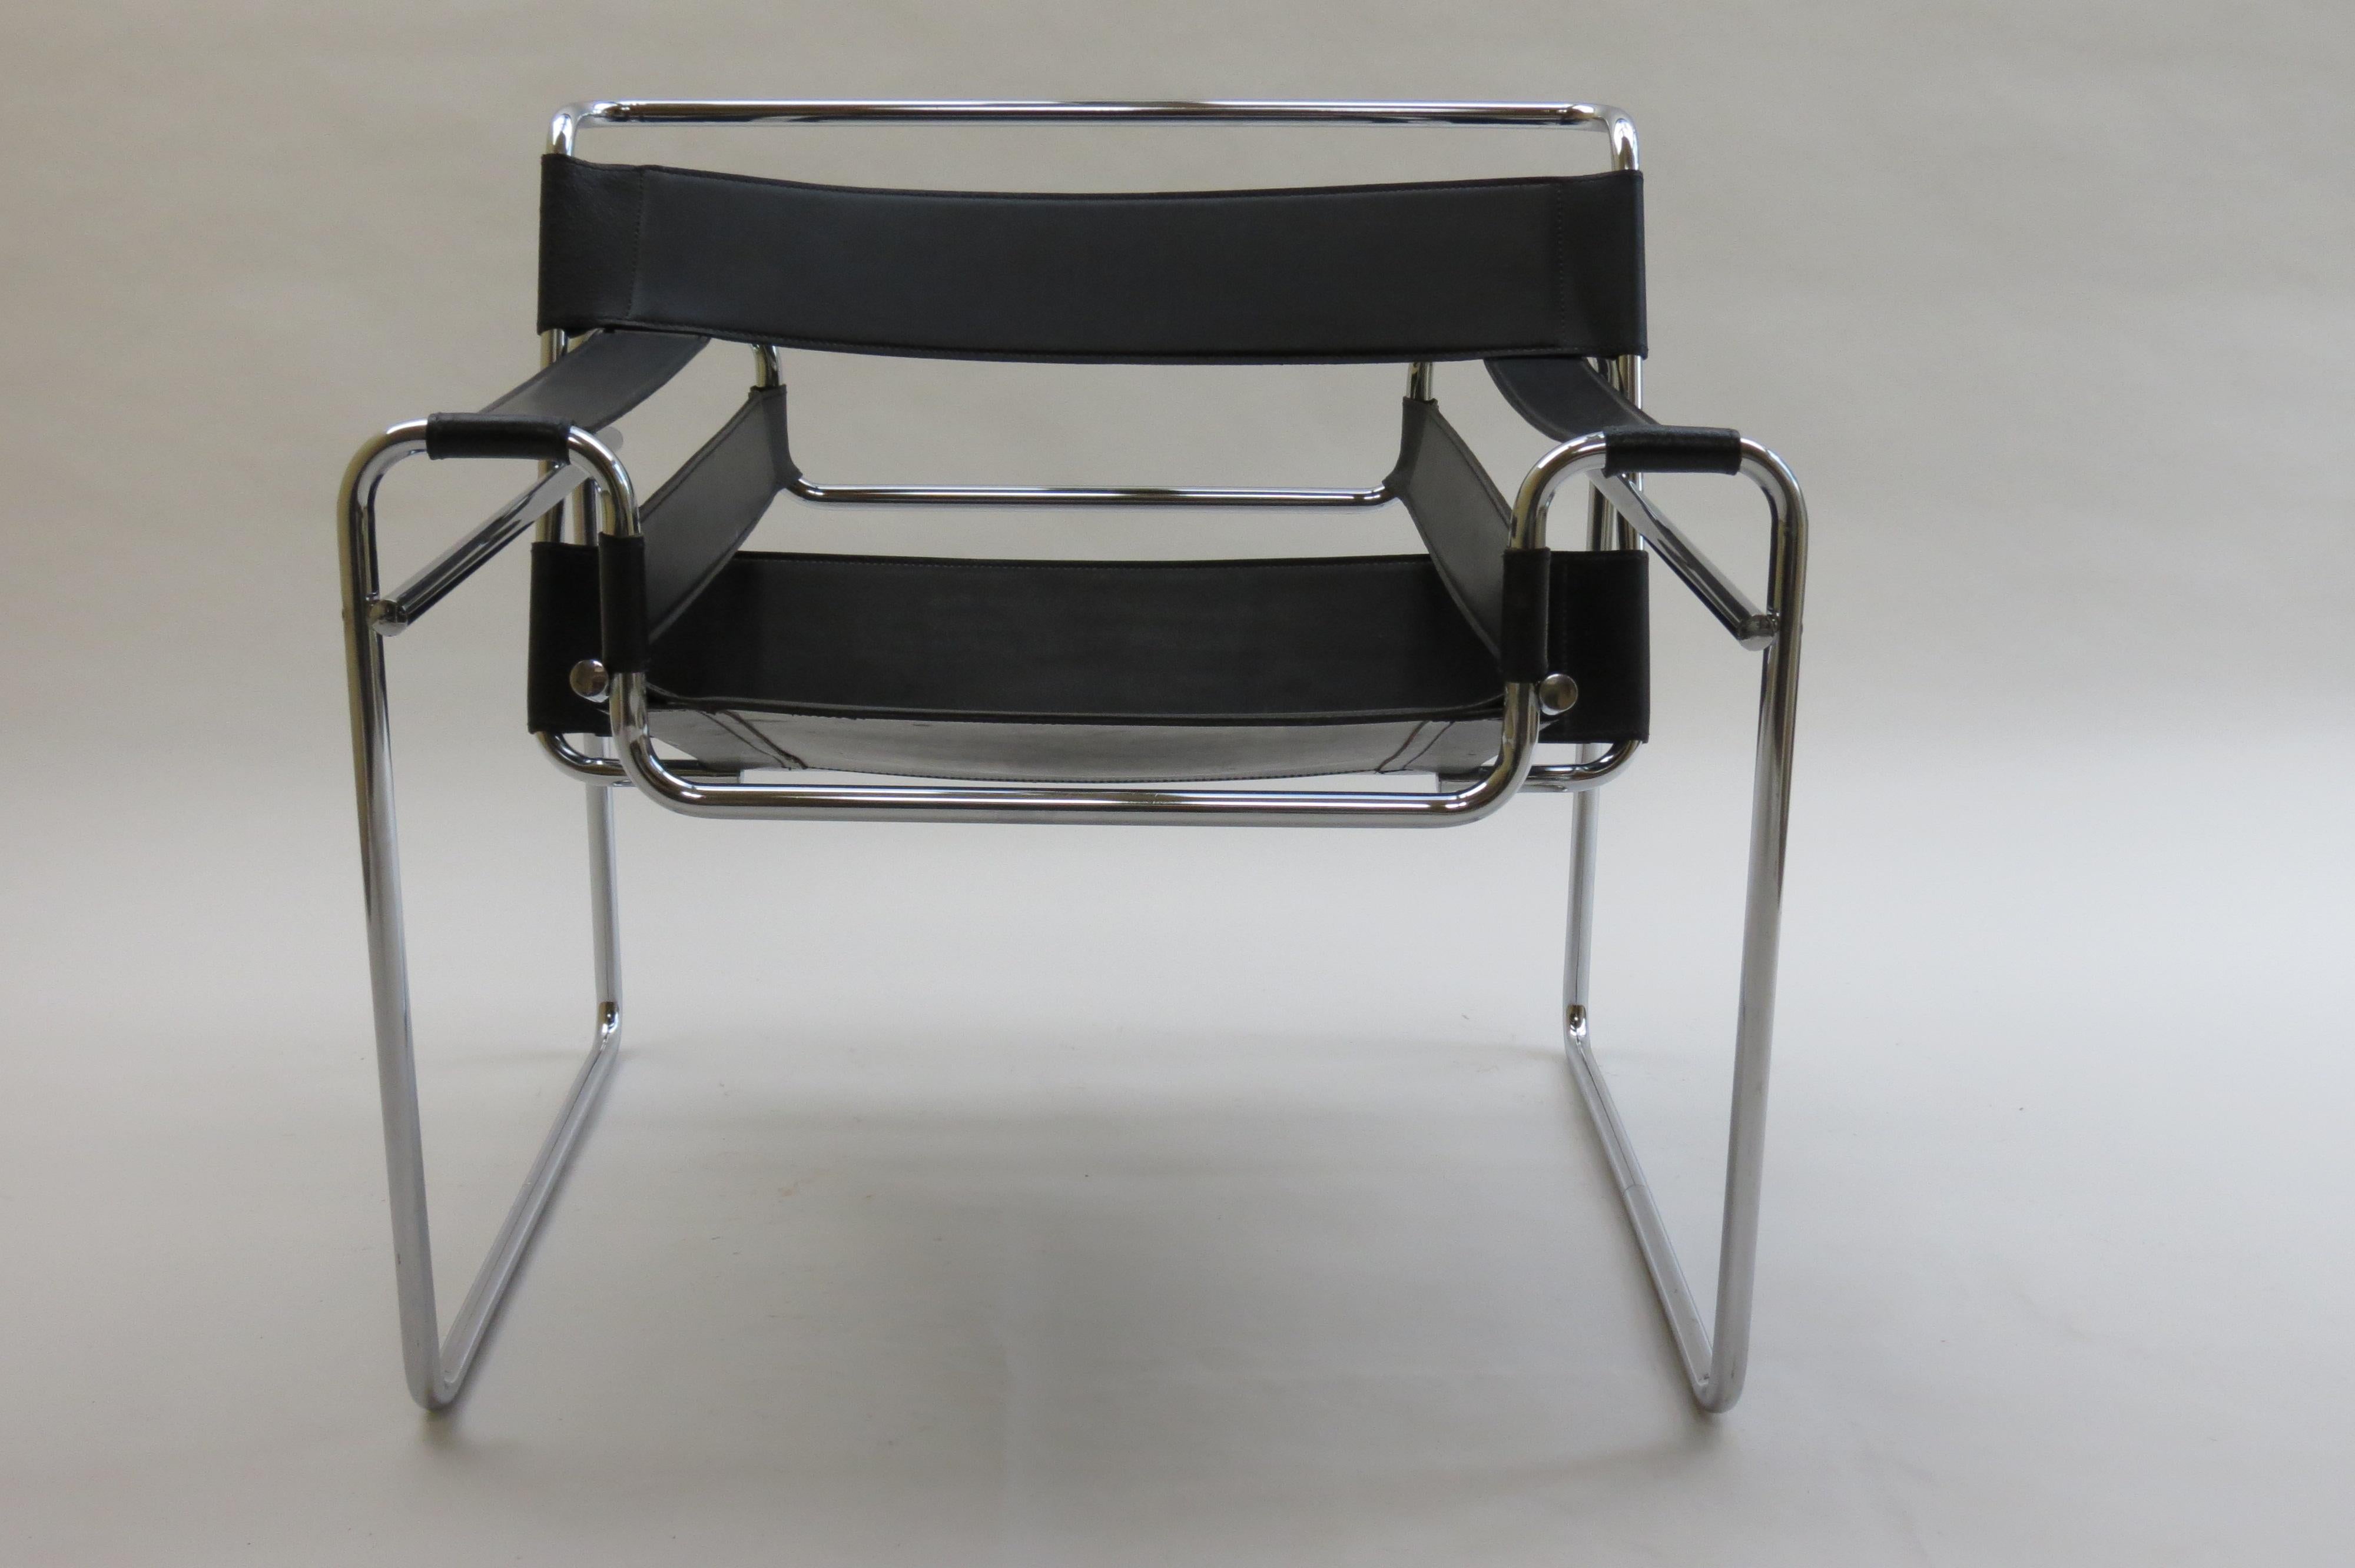 Bauhaus 1980s Vintage Wassily B3 Black Leather and Chrome Chair Marcel Breuer 2 Avail B